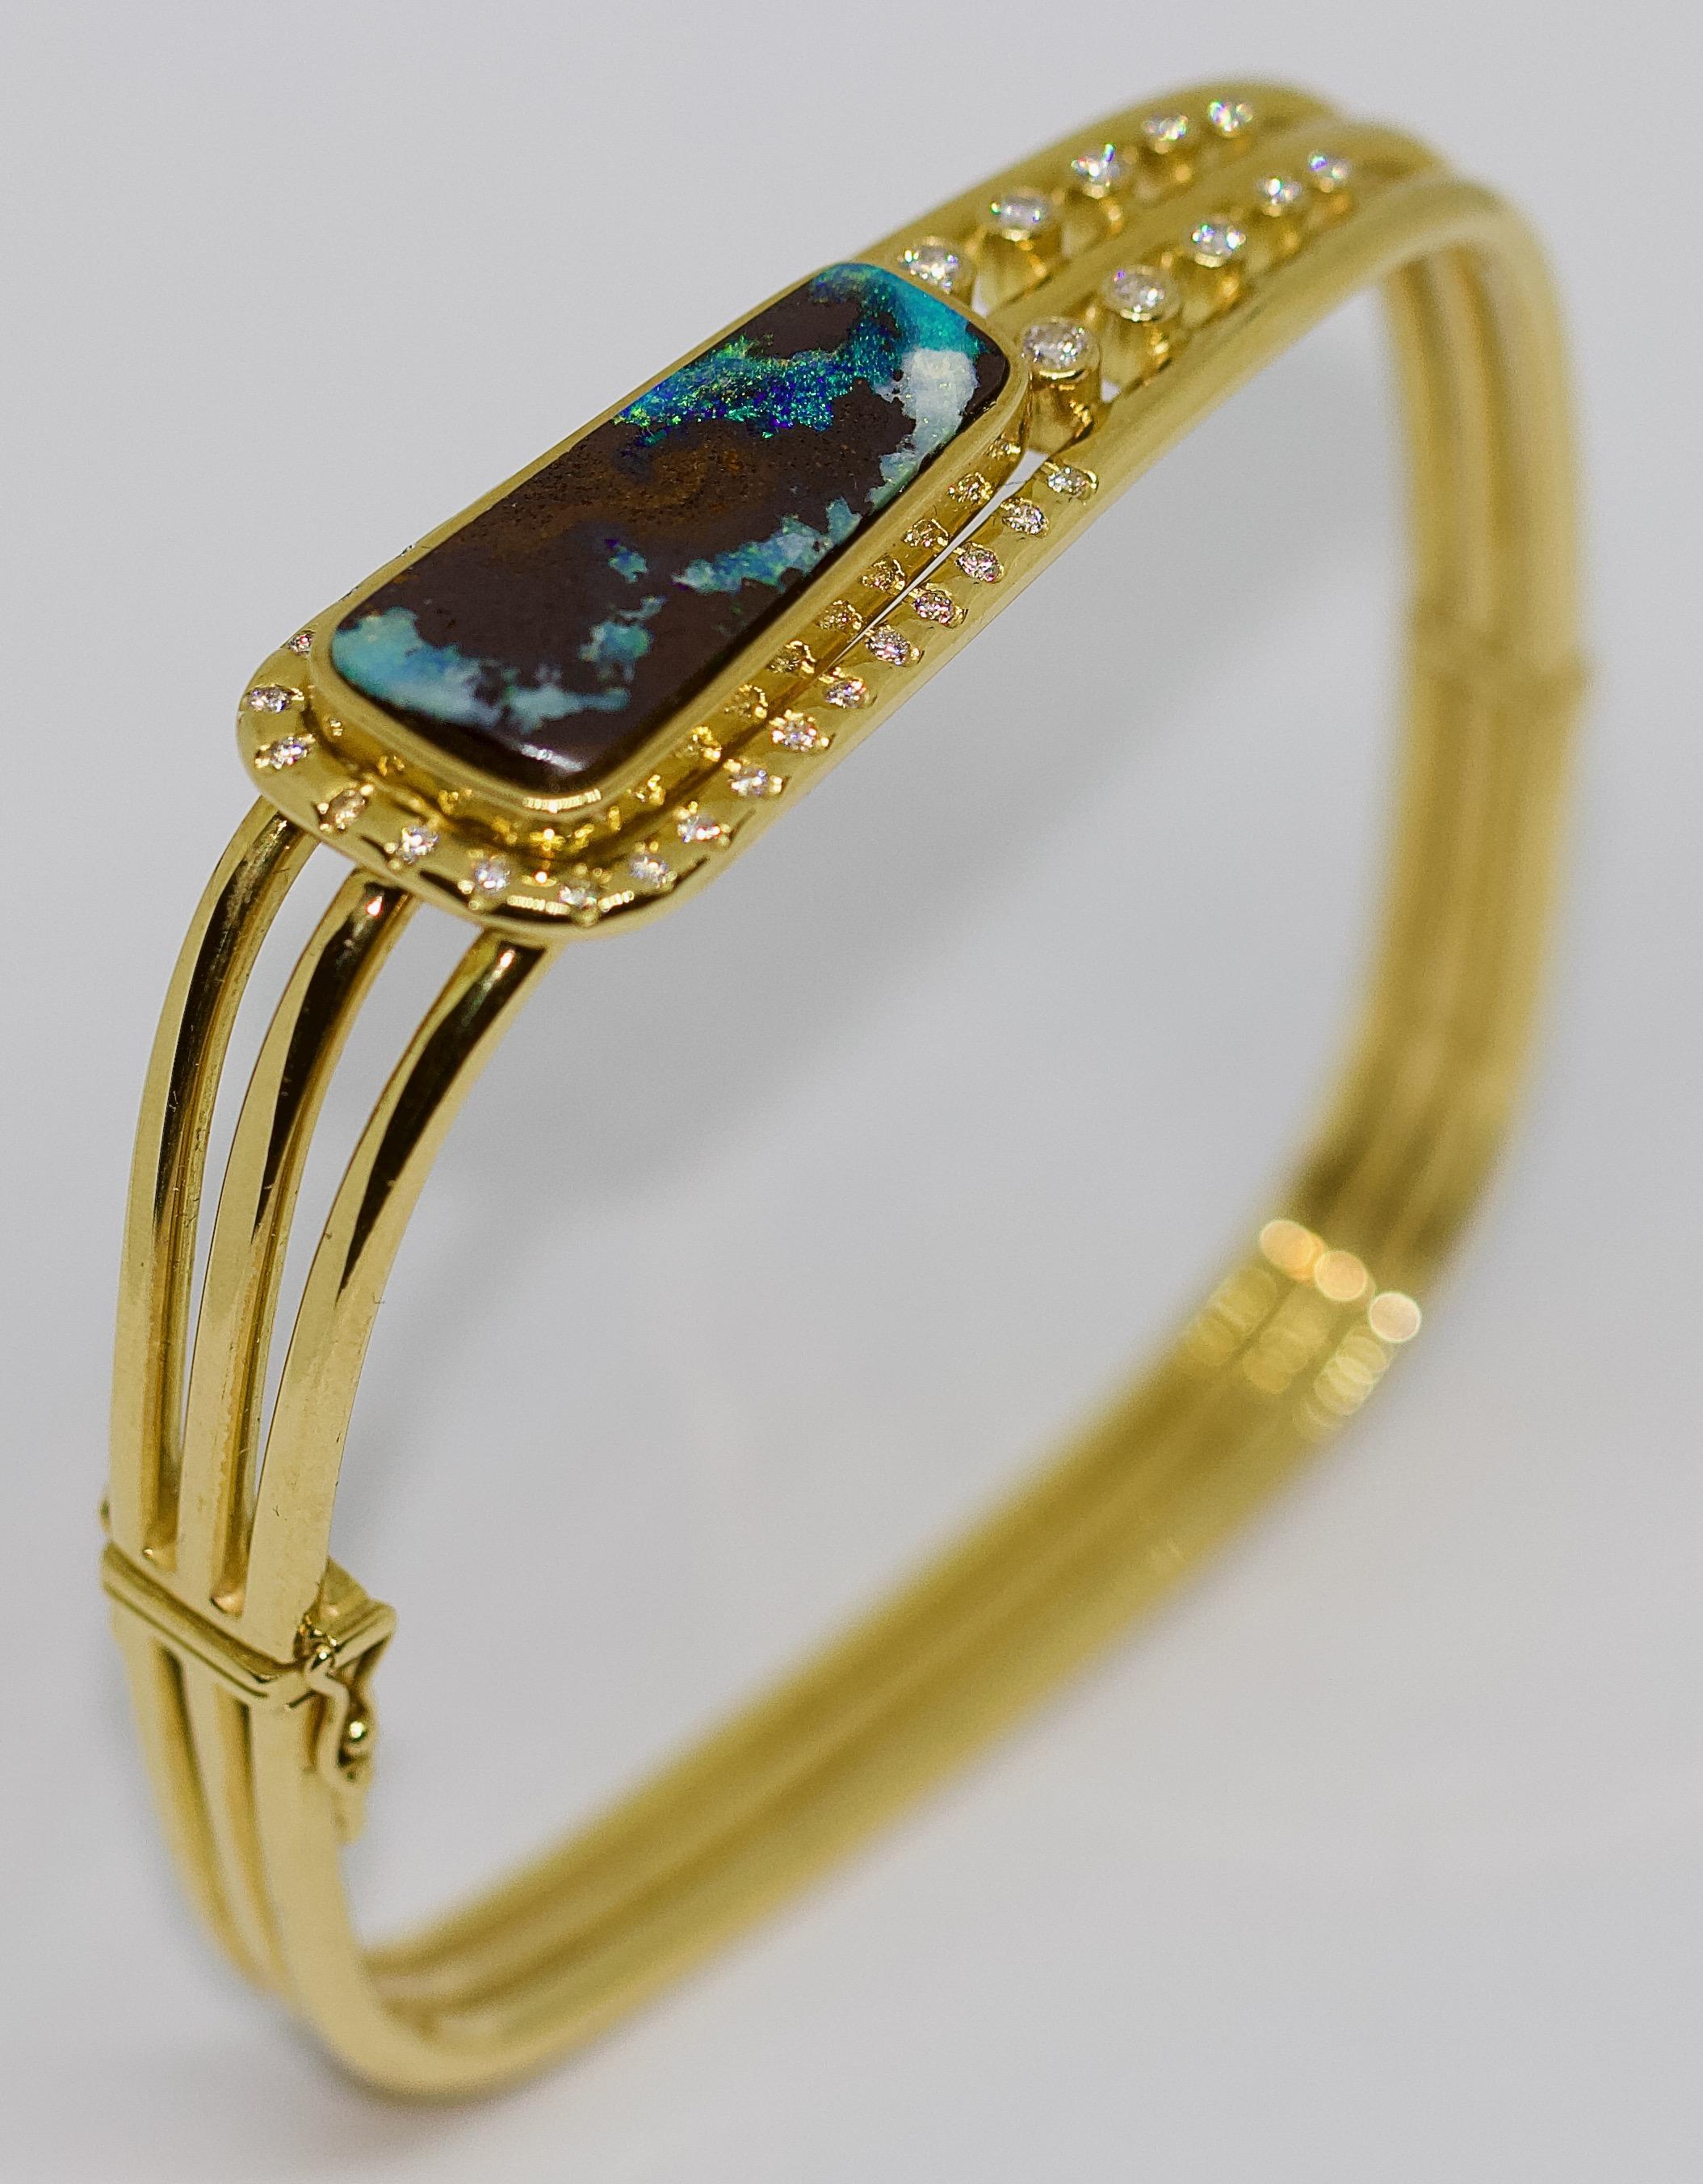 Solid ladies Bangle, 18K Gold, with large Opal and Diamonds.

Natural, solid opal.
Diamonds: very good quality, white, total carat 0.65.

Bangle is hallmarked.

Including certificate of authenticity.